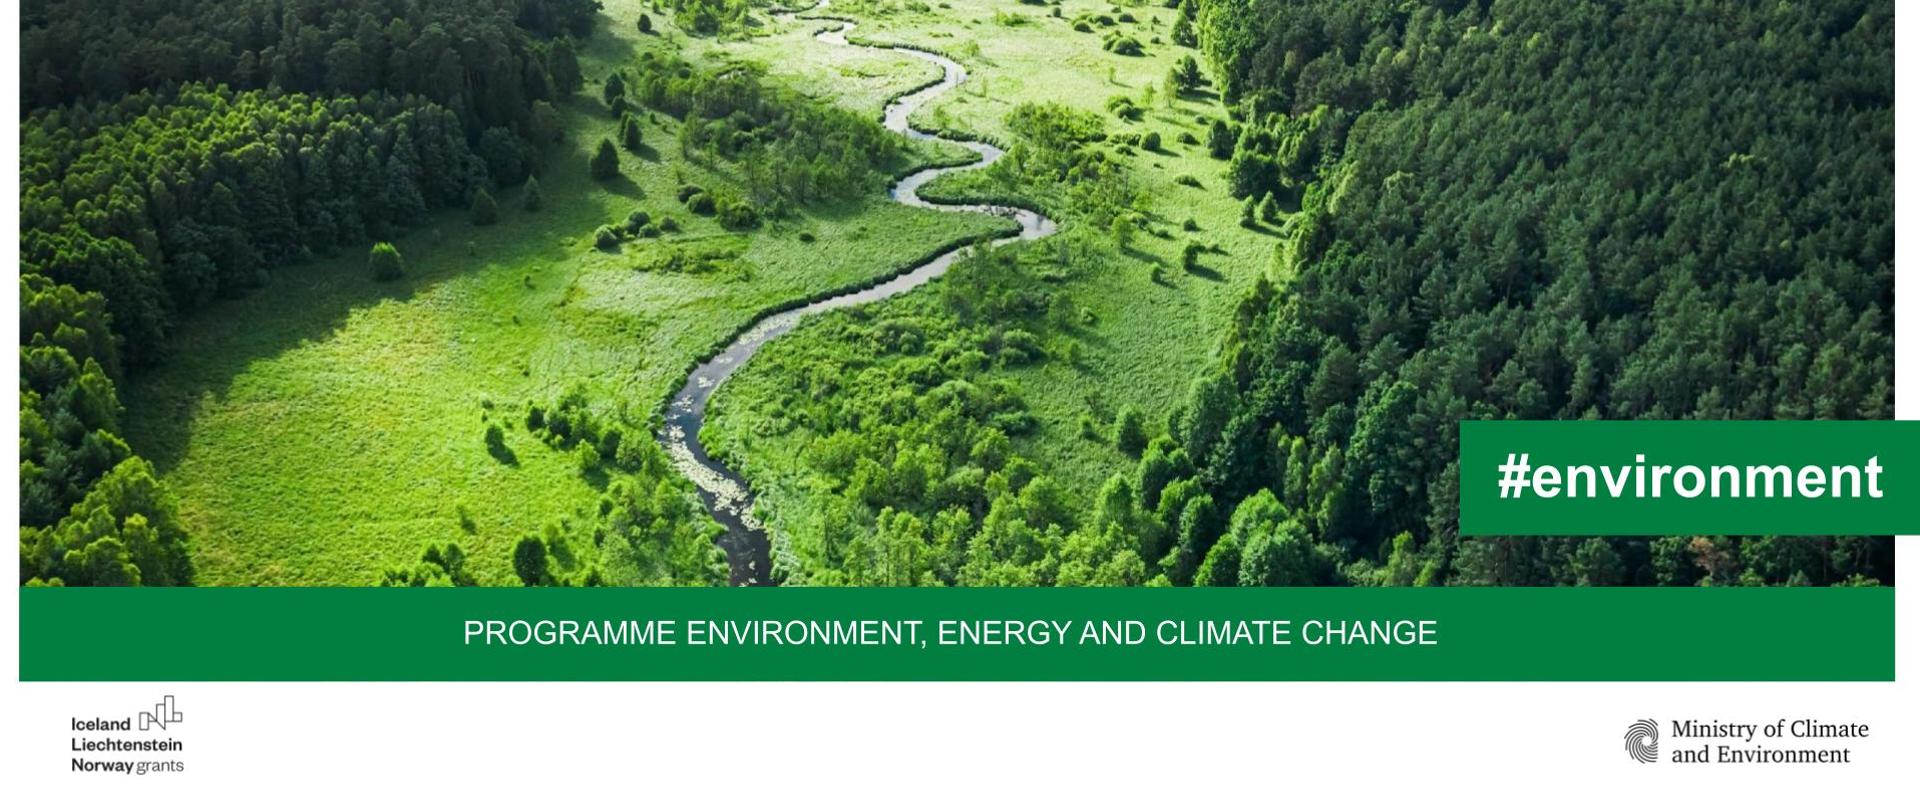 Environment Energy and Climate Change Programme #environment EMPI